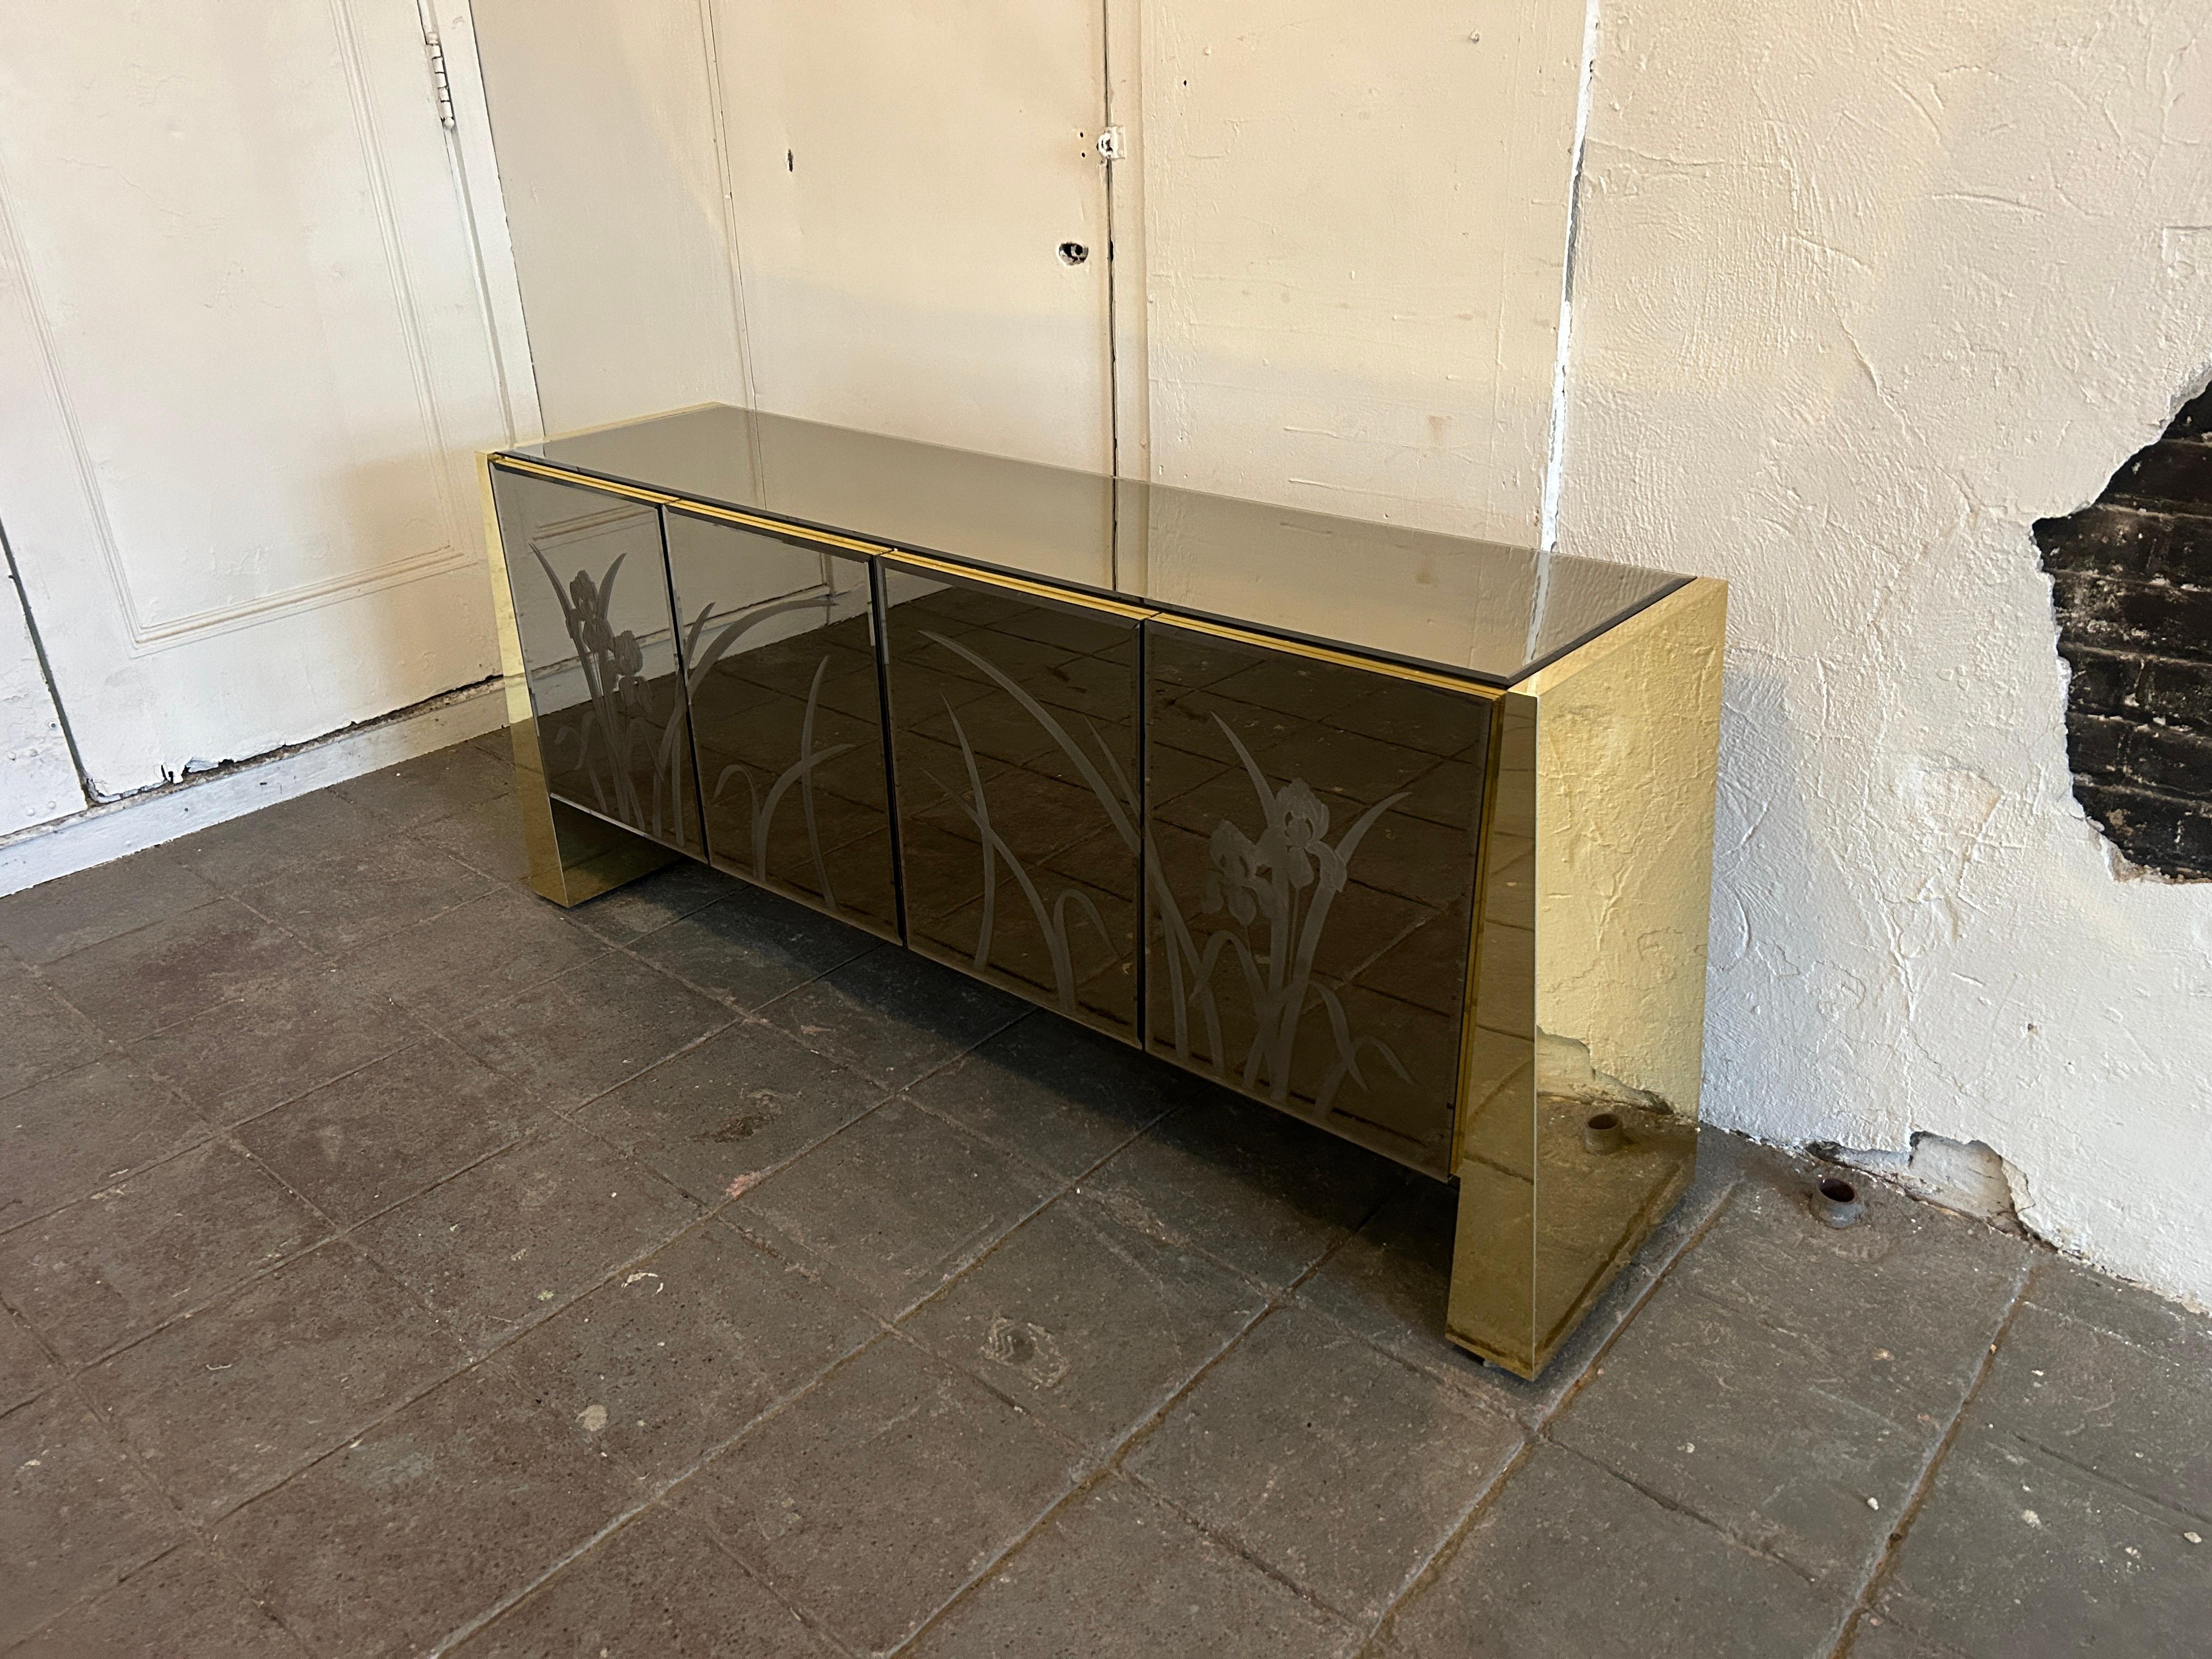 Post Modern Floral smoked mirror glass 4 door credenza with mirror brass by Ello. Great Post Modern mirror sideboard with 4 Doors adjustable shelves and (1) drawer. The front doors have floral etched pattern. The sides have Brass chrome angle legs.